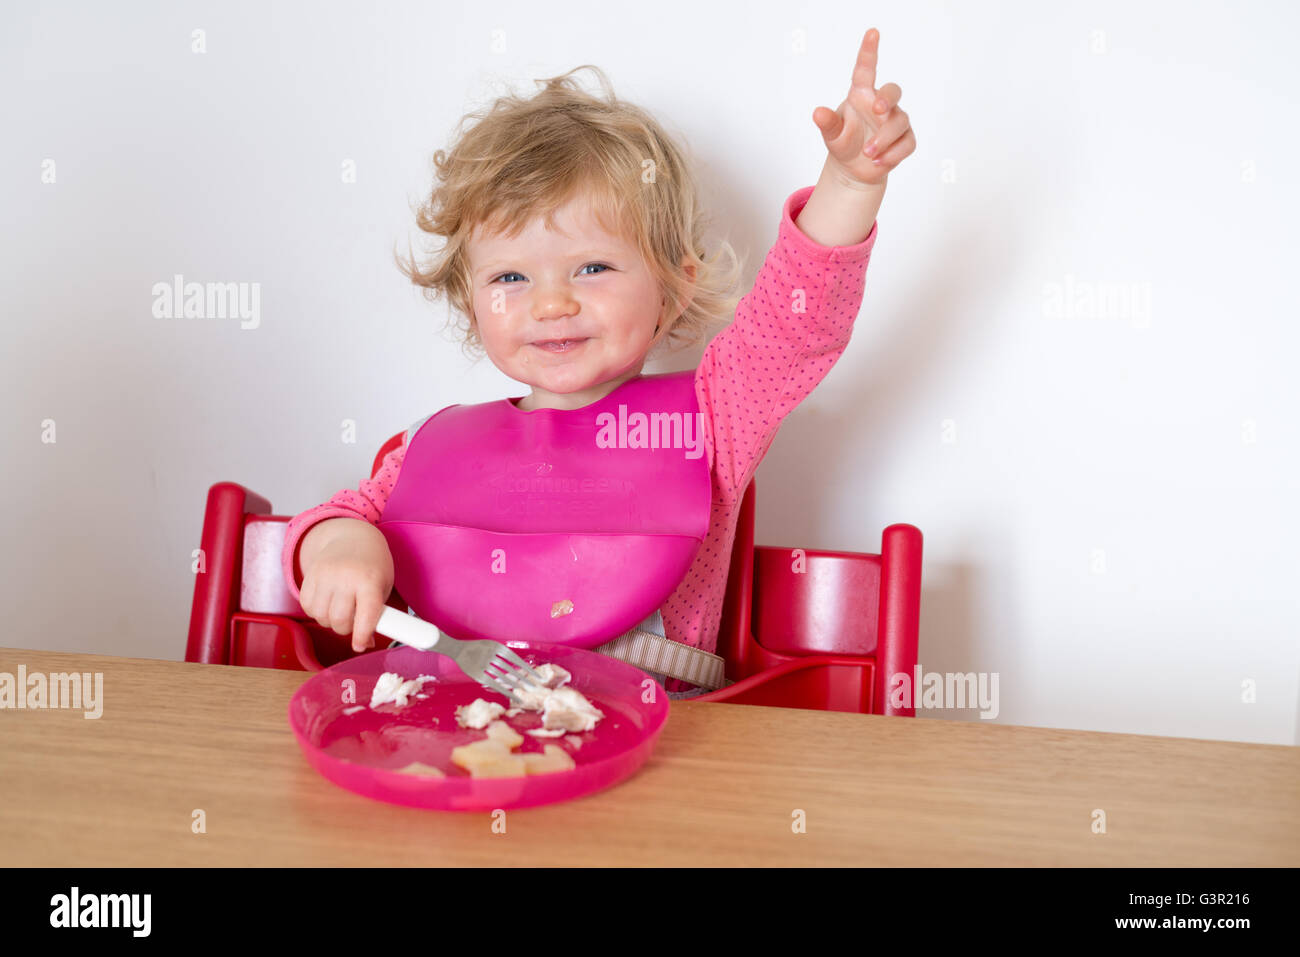 One year old baby sitting in high chair and eating meal, England, UK Stock Photo